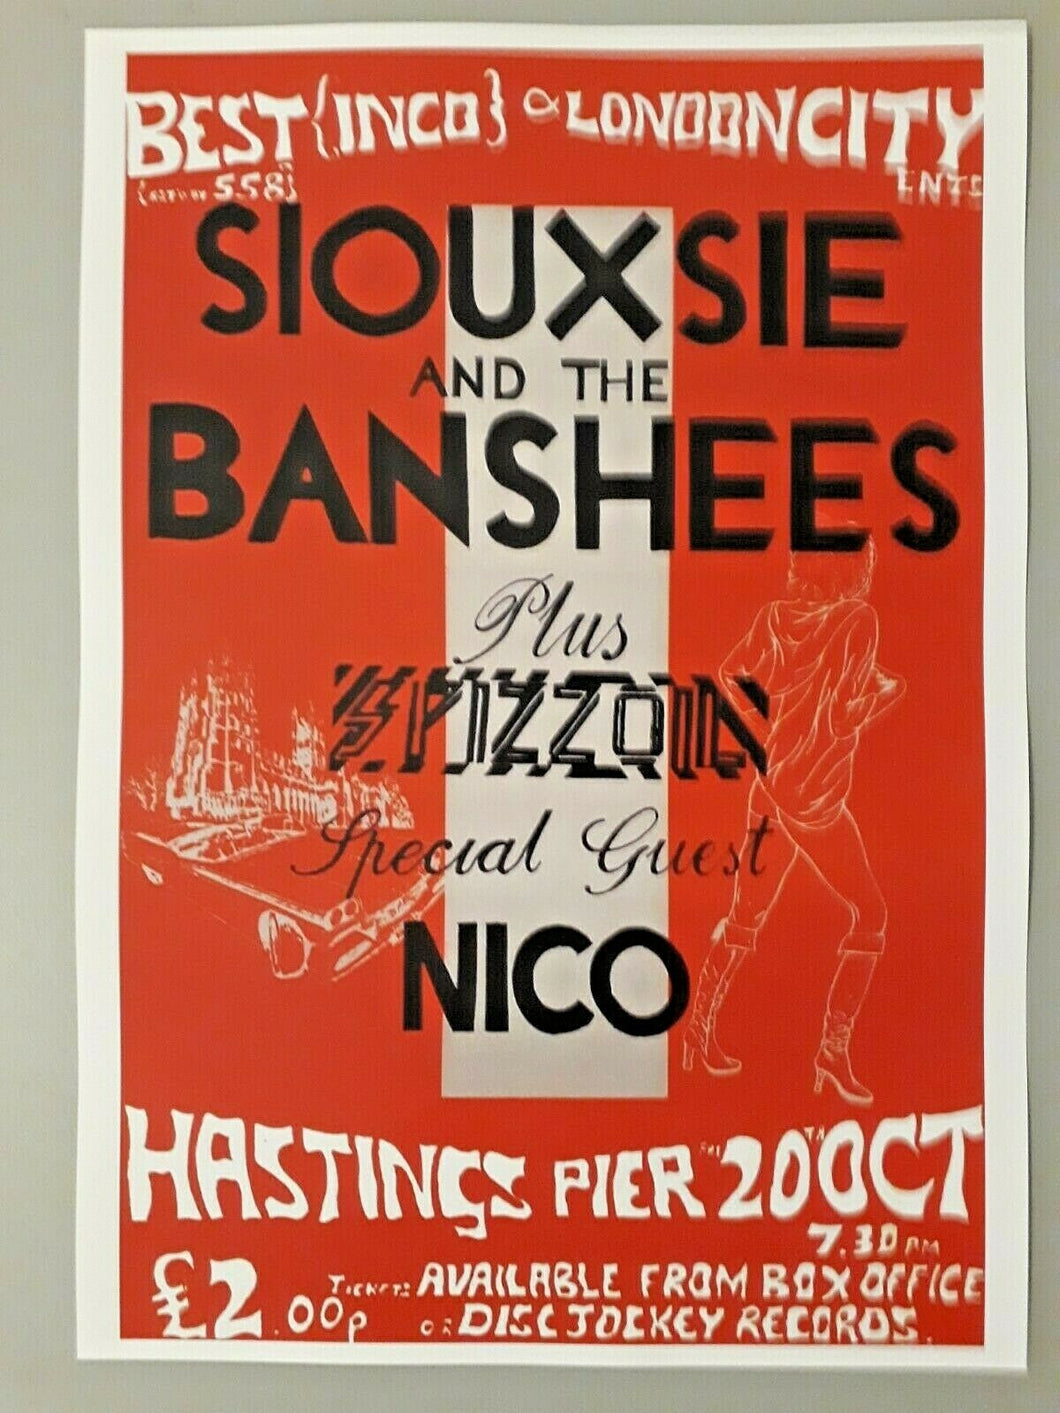 Siouxsie & Banshees concert poster - Live Hastings 1979 promotional A3 reprint - Original Music and Movie Posters for sale from Bamalama - Online Poster Store UK London